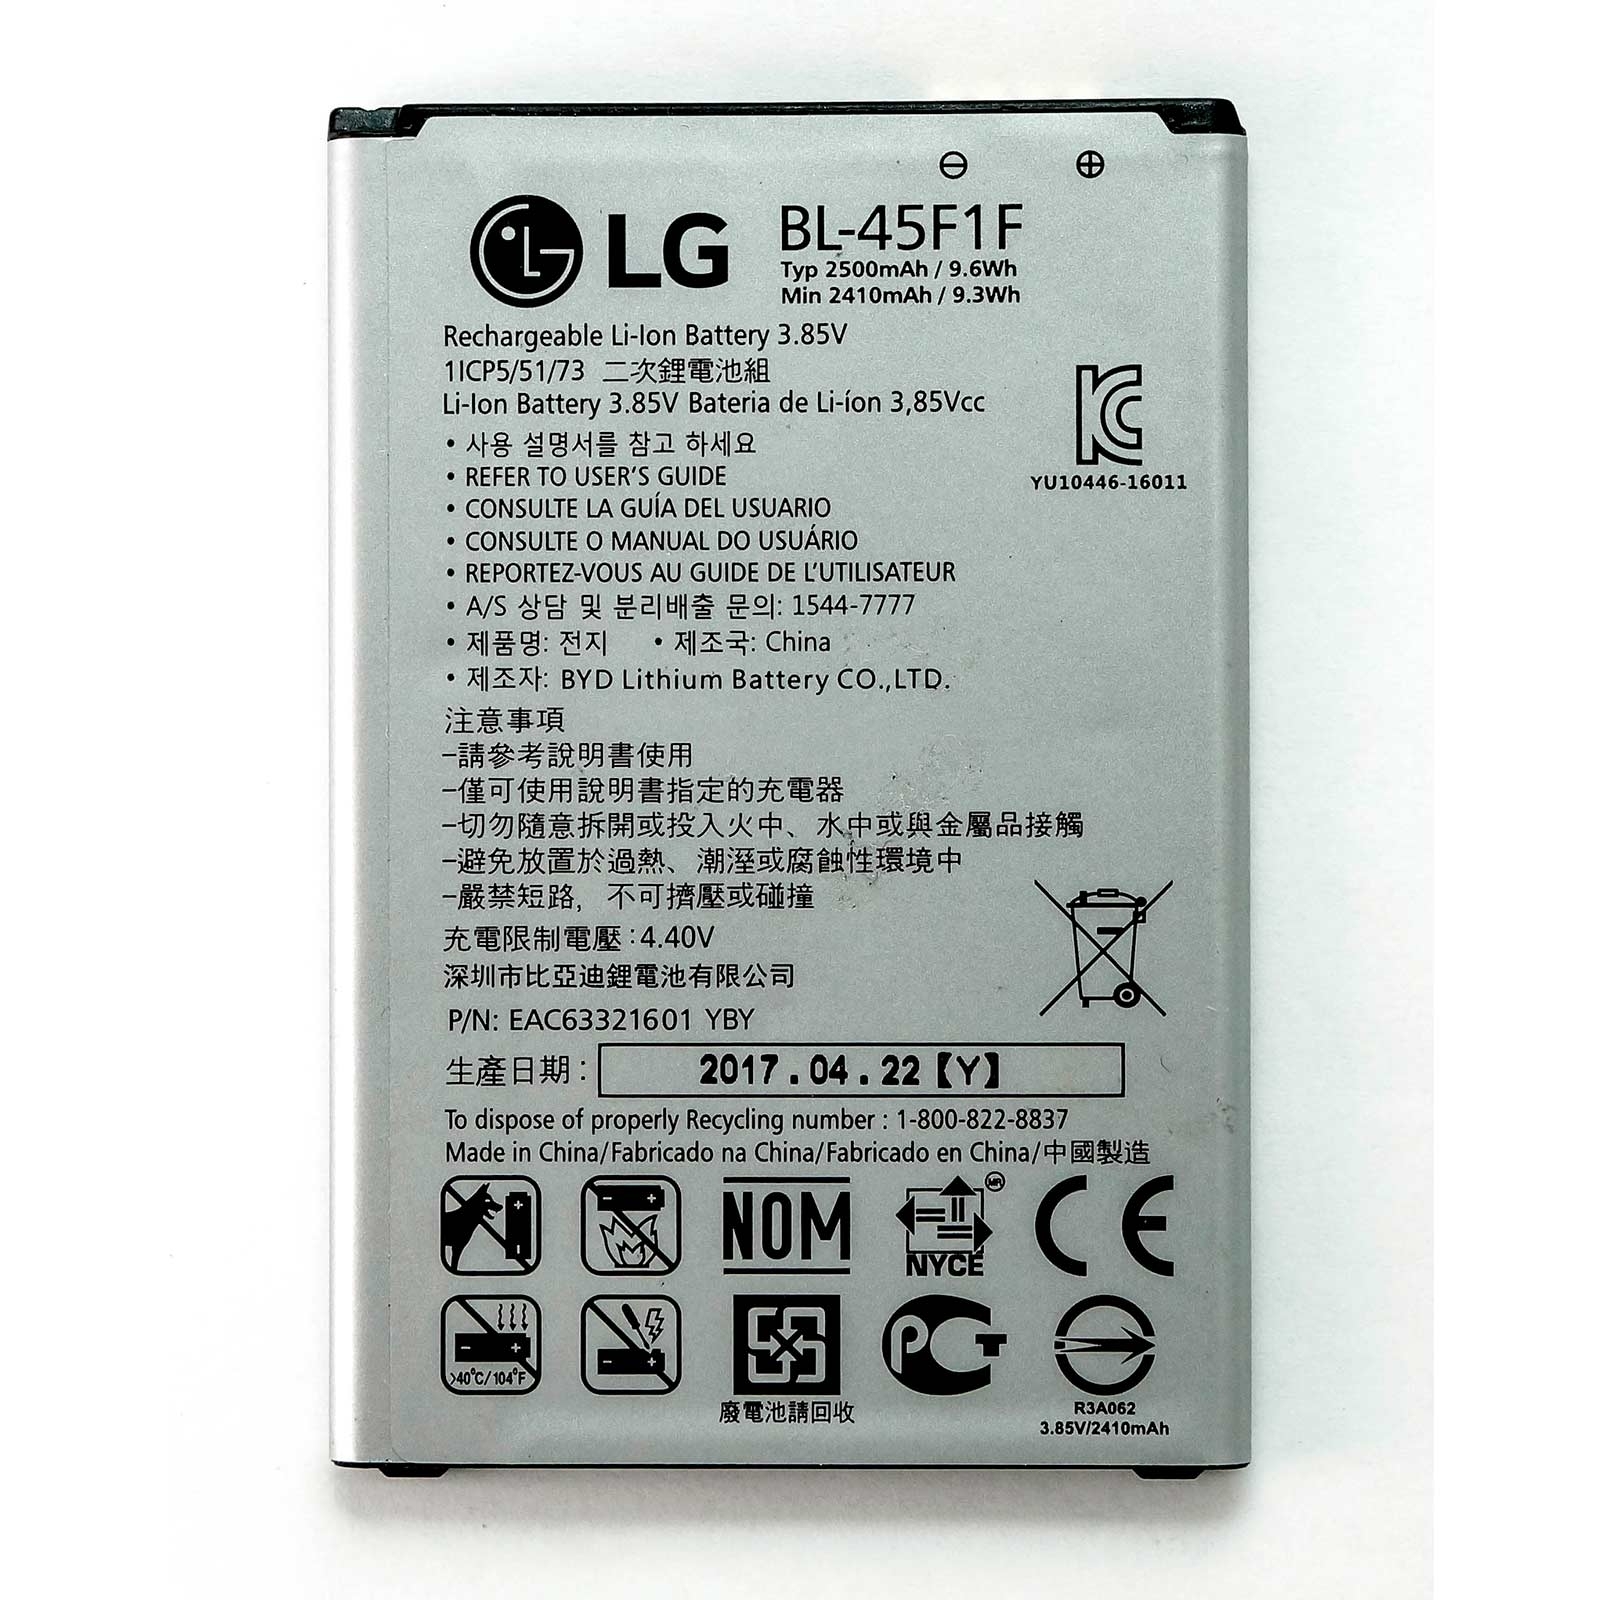 Primary image for LG Li-ion Phone Battery 3.85V Typ 2500mAh 9.6Wh BL-45F1F EAC63321601 YBY New OEM